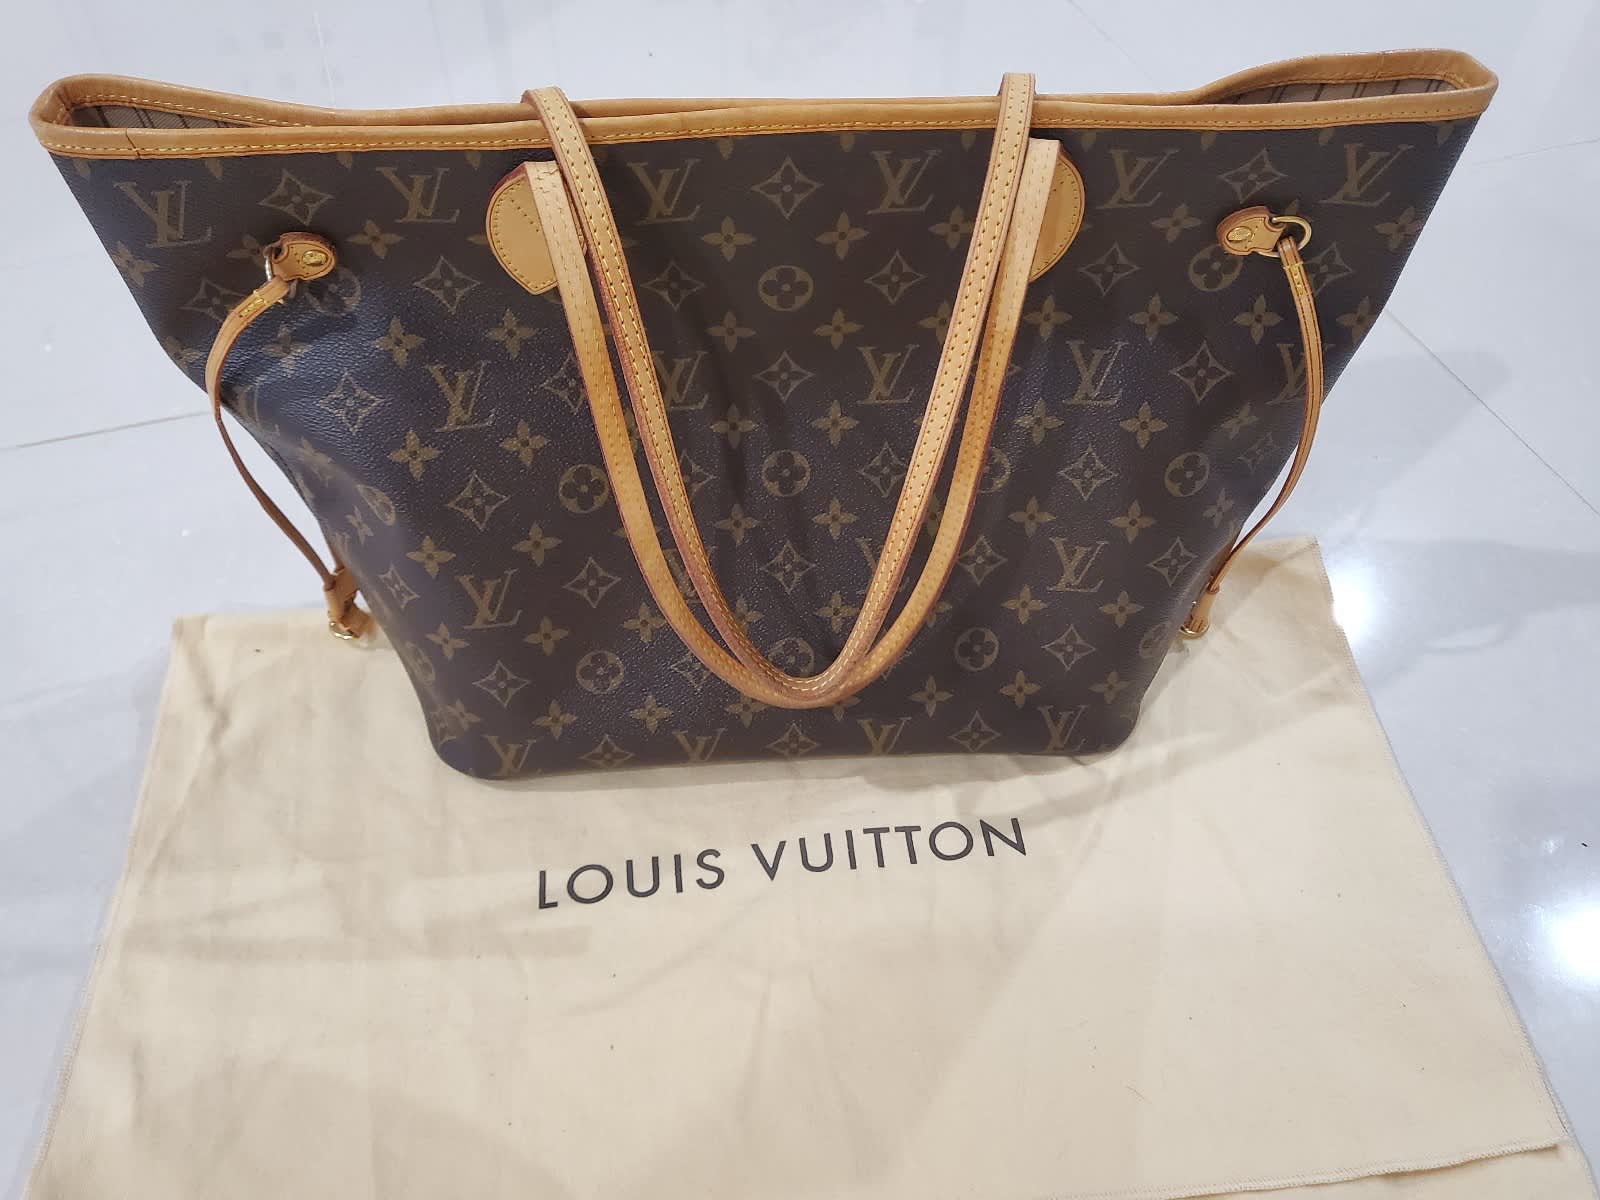 Louis vuitton Felicie Pochette Red, Bags, Gumtree Australia Canning Area  - Canning Vale